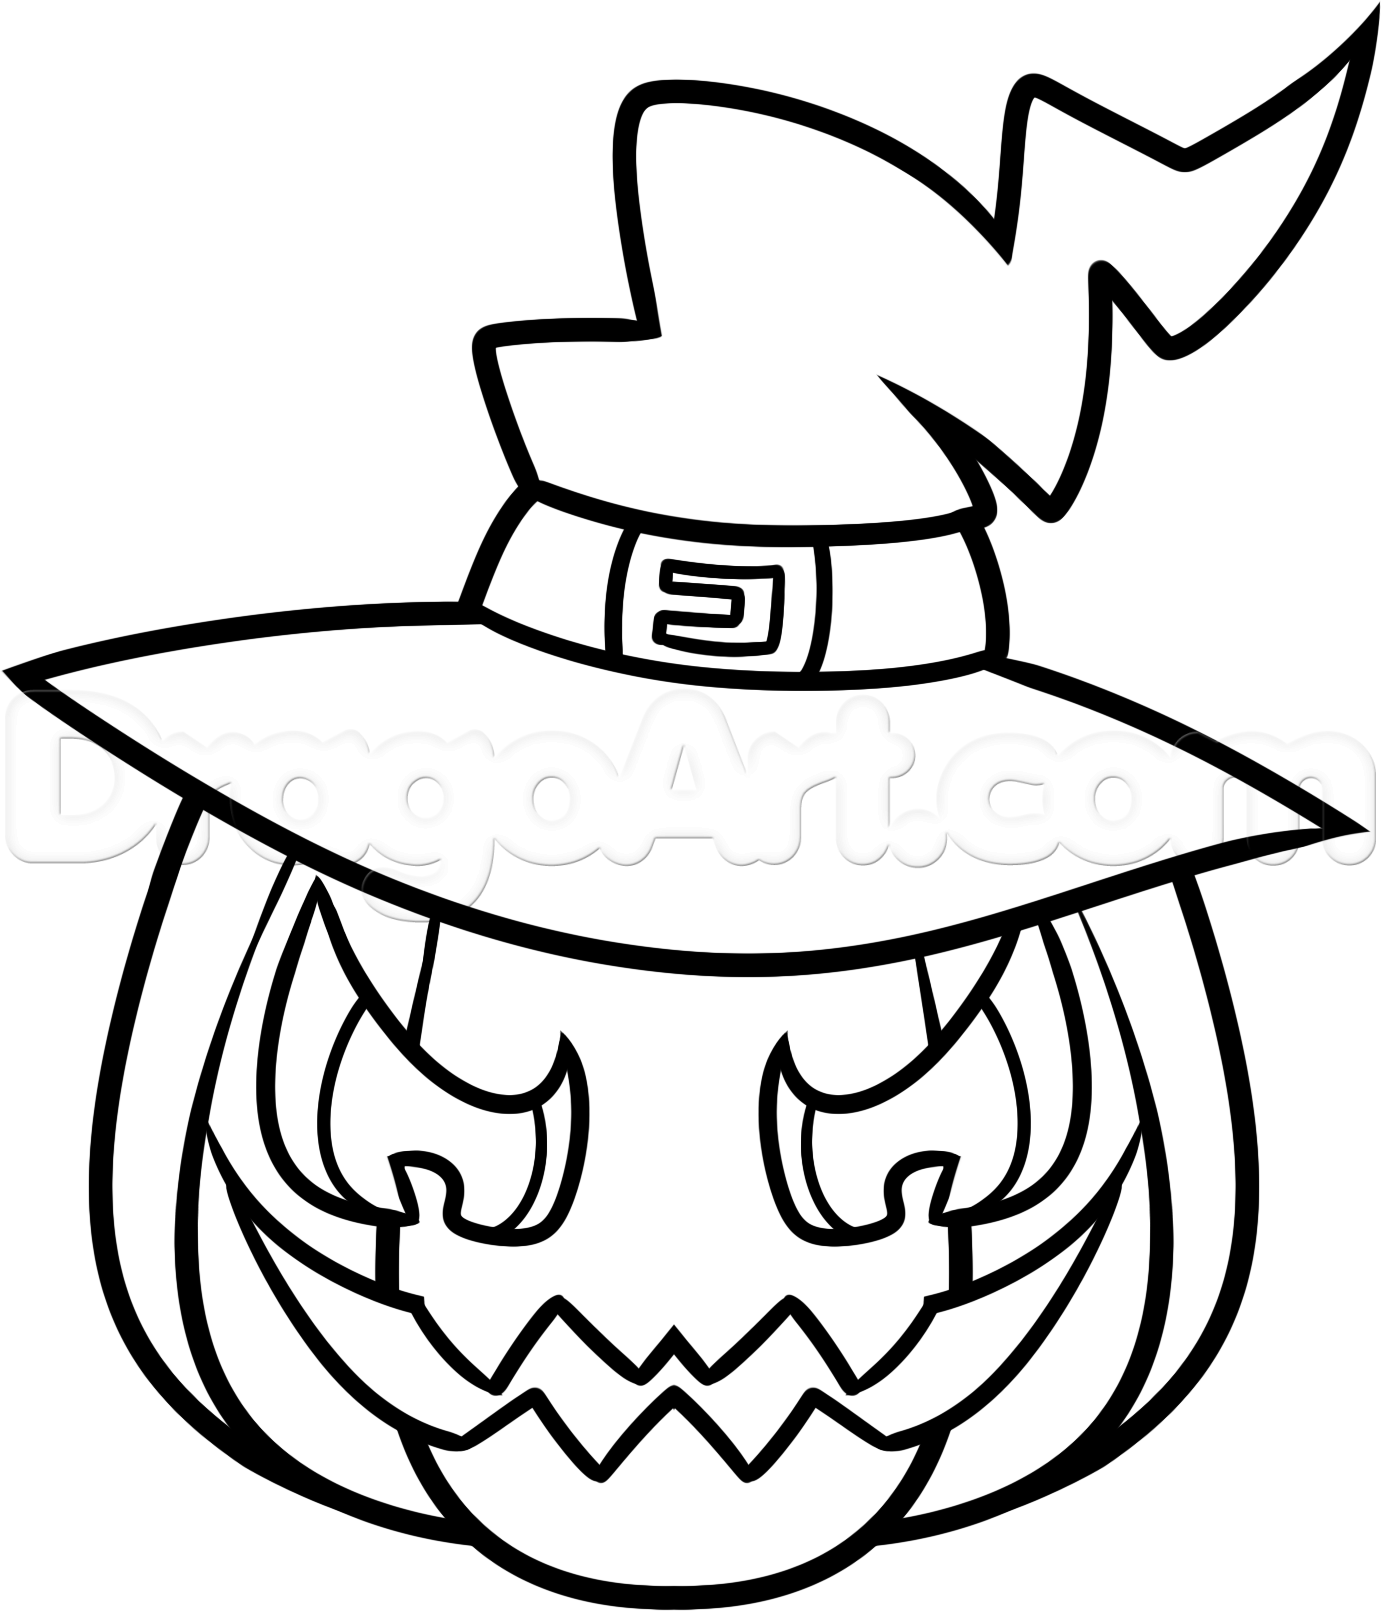 Halloween Line Drawings at PaintingValley.com  Explore collection of Halloween Line Drawings